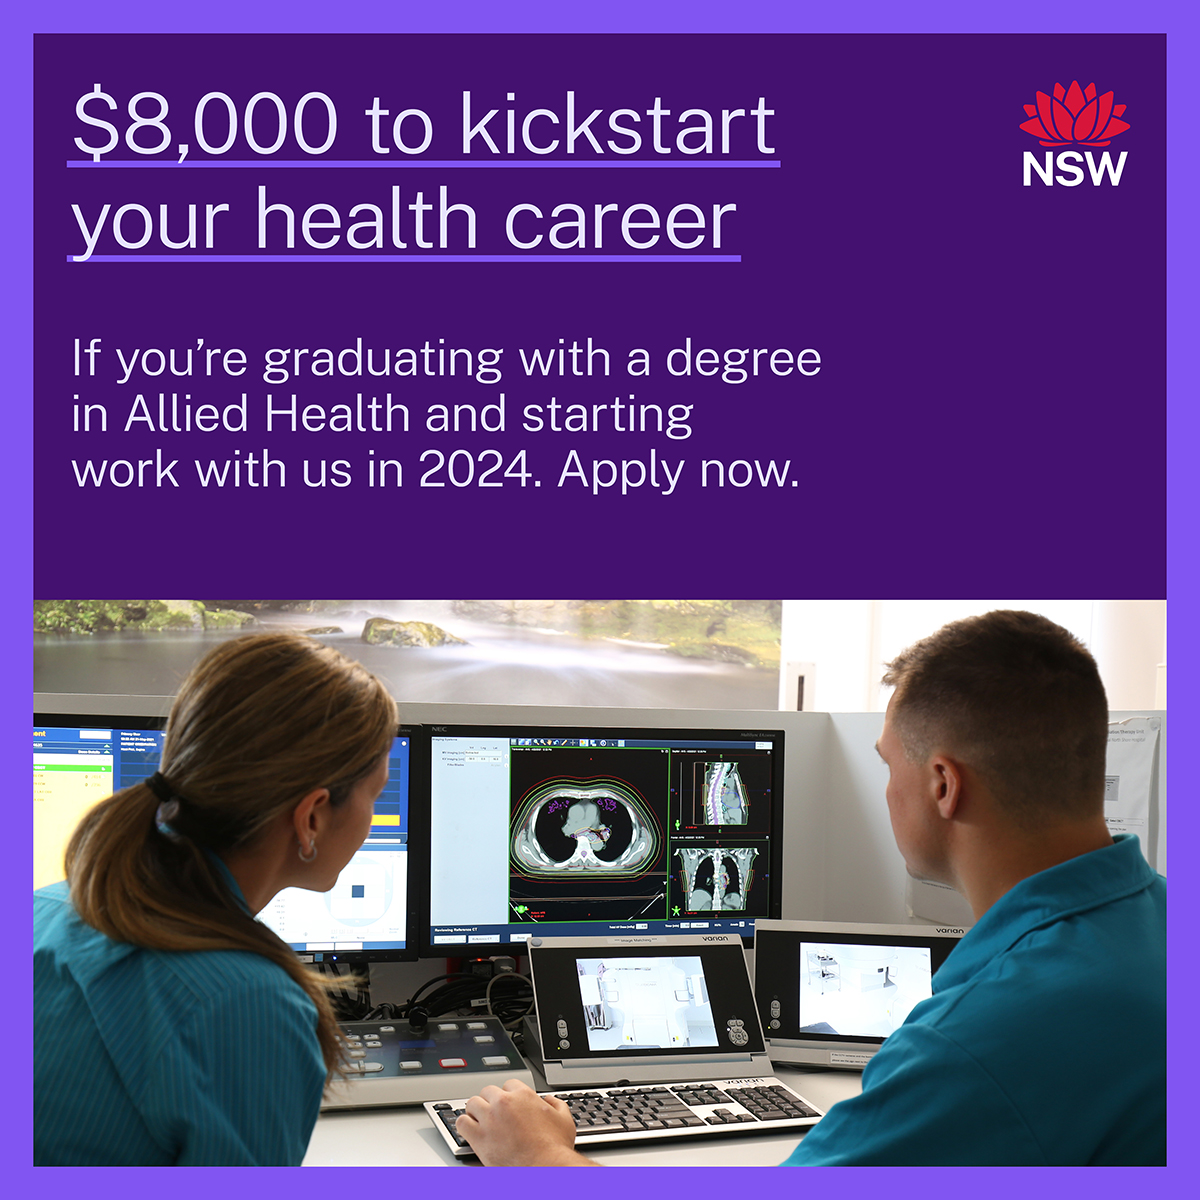 If you're a graduate in clinical psychology, occupational therapy, pharmacy, physiotherapy, radiation therapy, radiography, social work, sonography or speech pathology, NSW Health will pay you up to $8,000 to start your career in 2024. Find out more: health.nsw.gov.au/studysubsidies